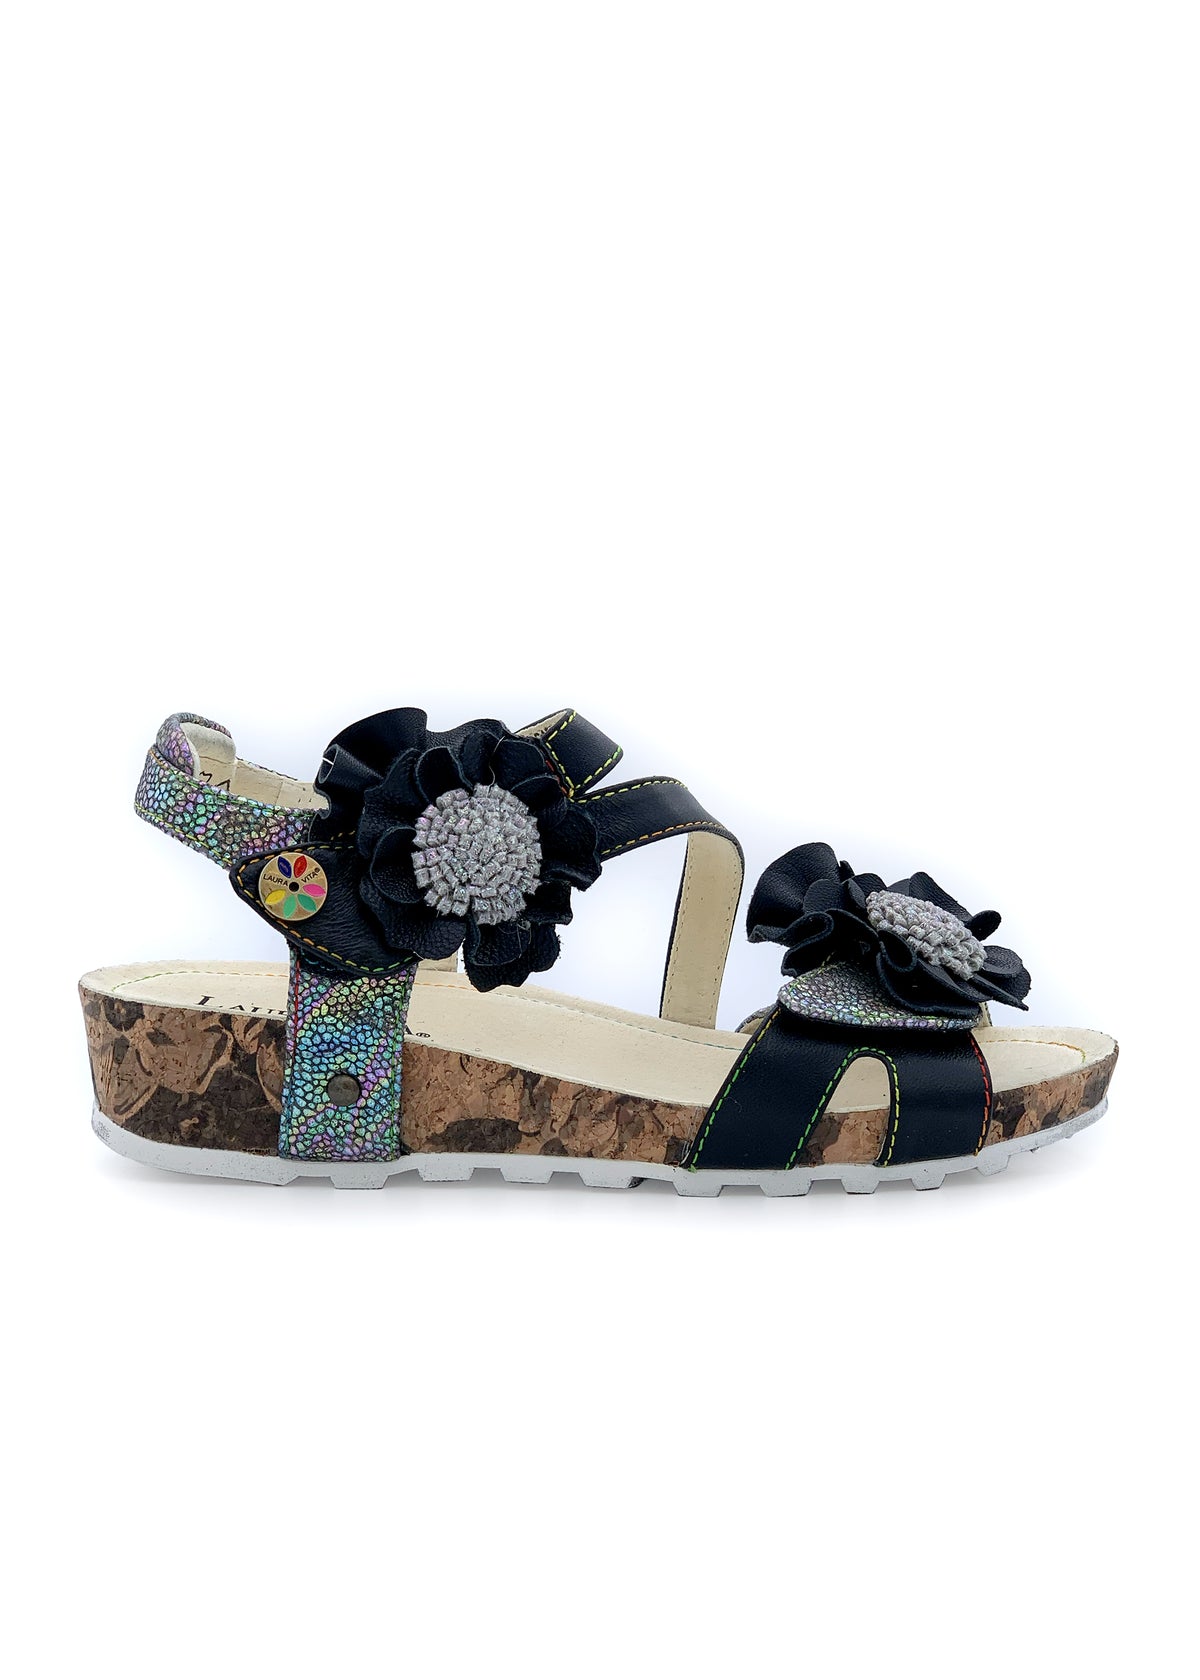 Rose sandals - Brcyano 68, black leather, silver patterns